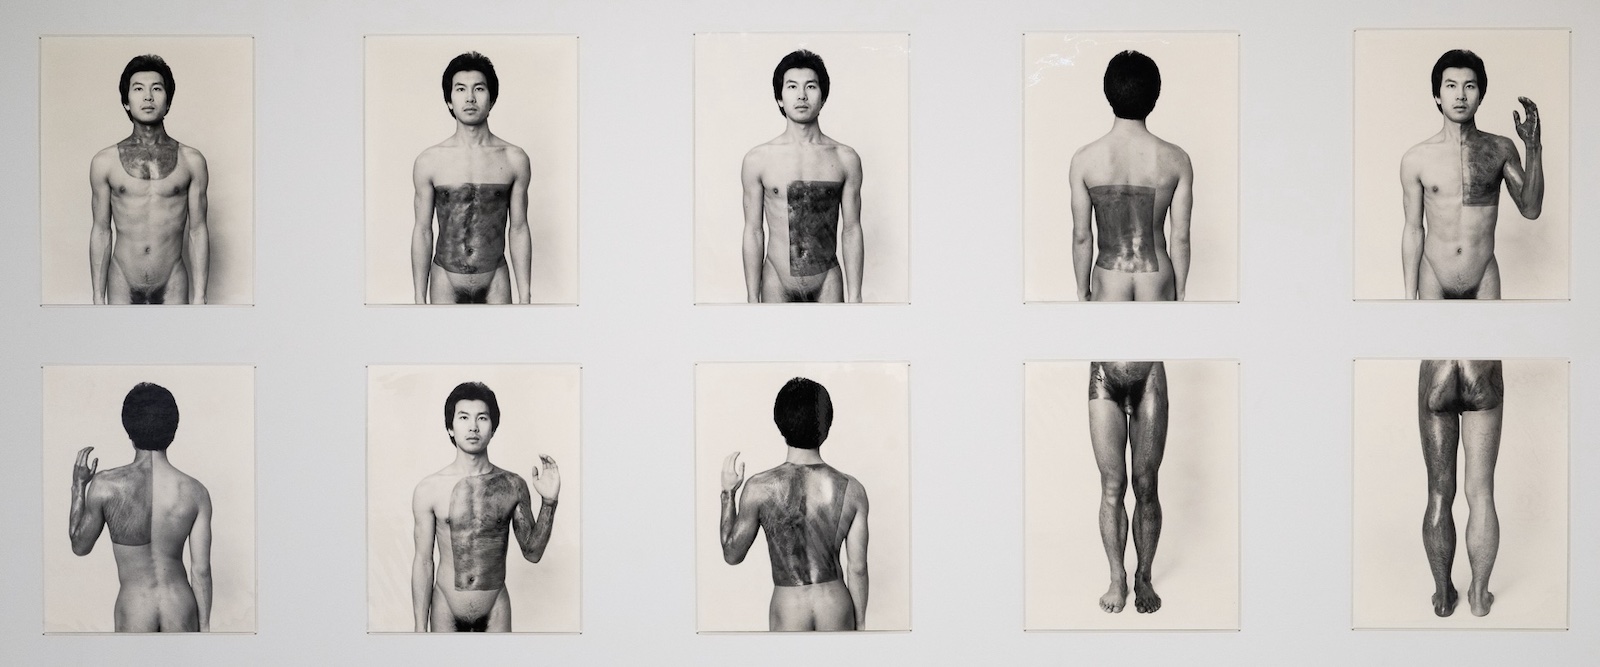 Two rows of vertical black and white prints depict Theodore Sasketche Wan, nude and painting different areas of his body with a dark antiseptic material. The photos depict him facing towards and away from the camera.